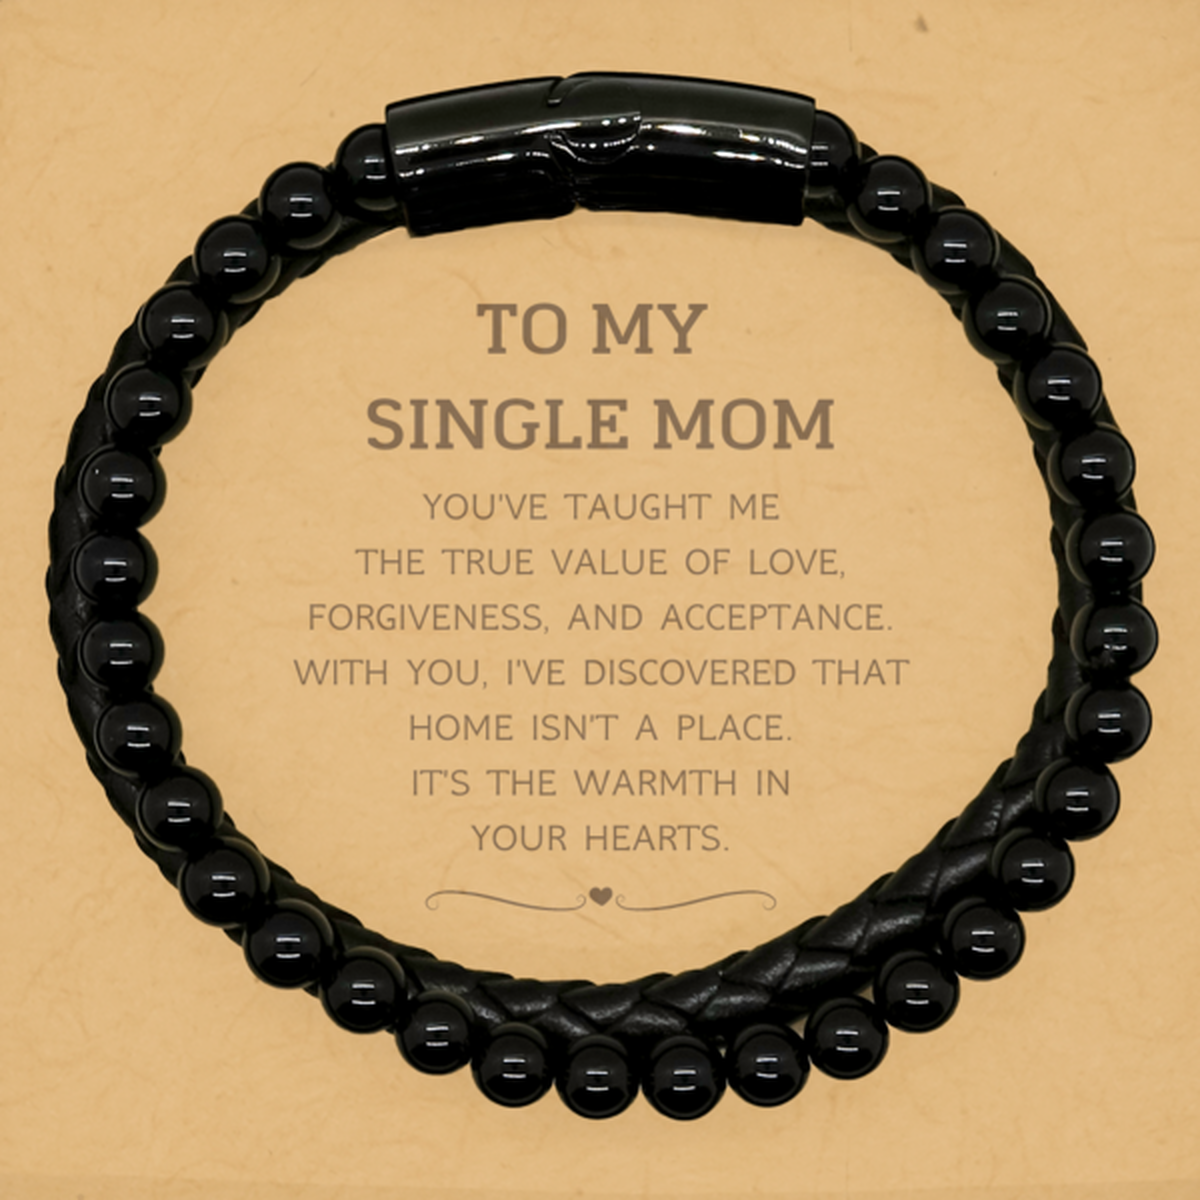 To My Single Mom Gifts, You've taught me the true value of love, Thank You Gifts For Single Mom, Birthday Stone Leather Bracelets For Single Mom